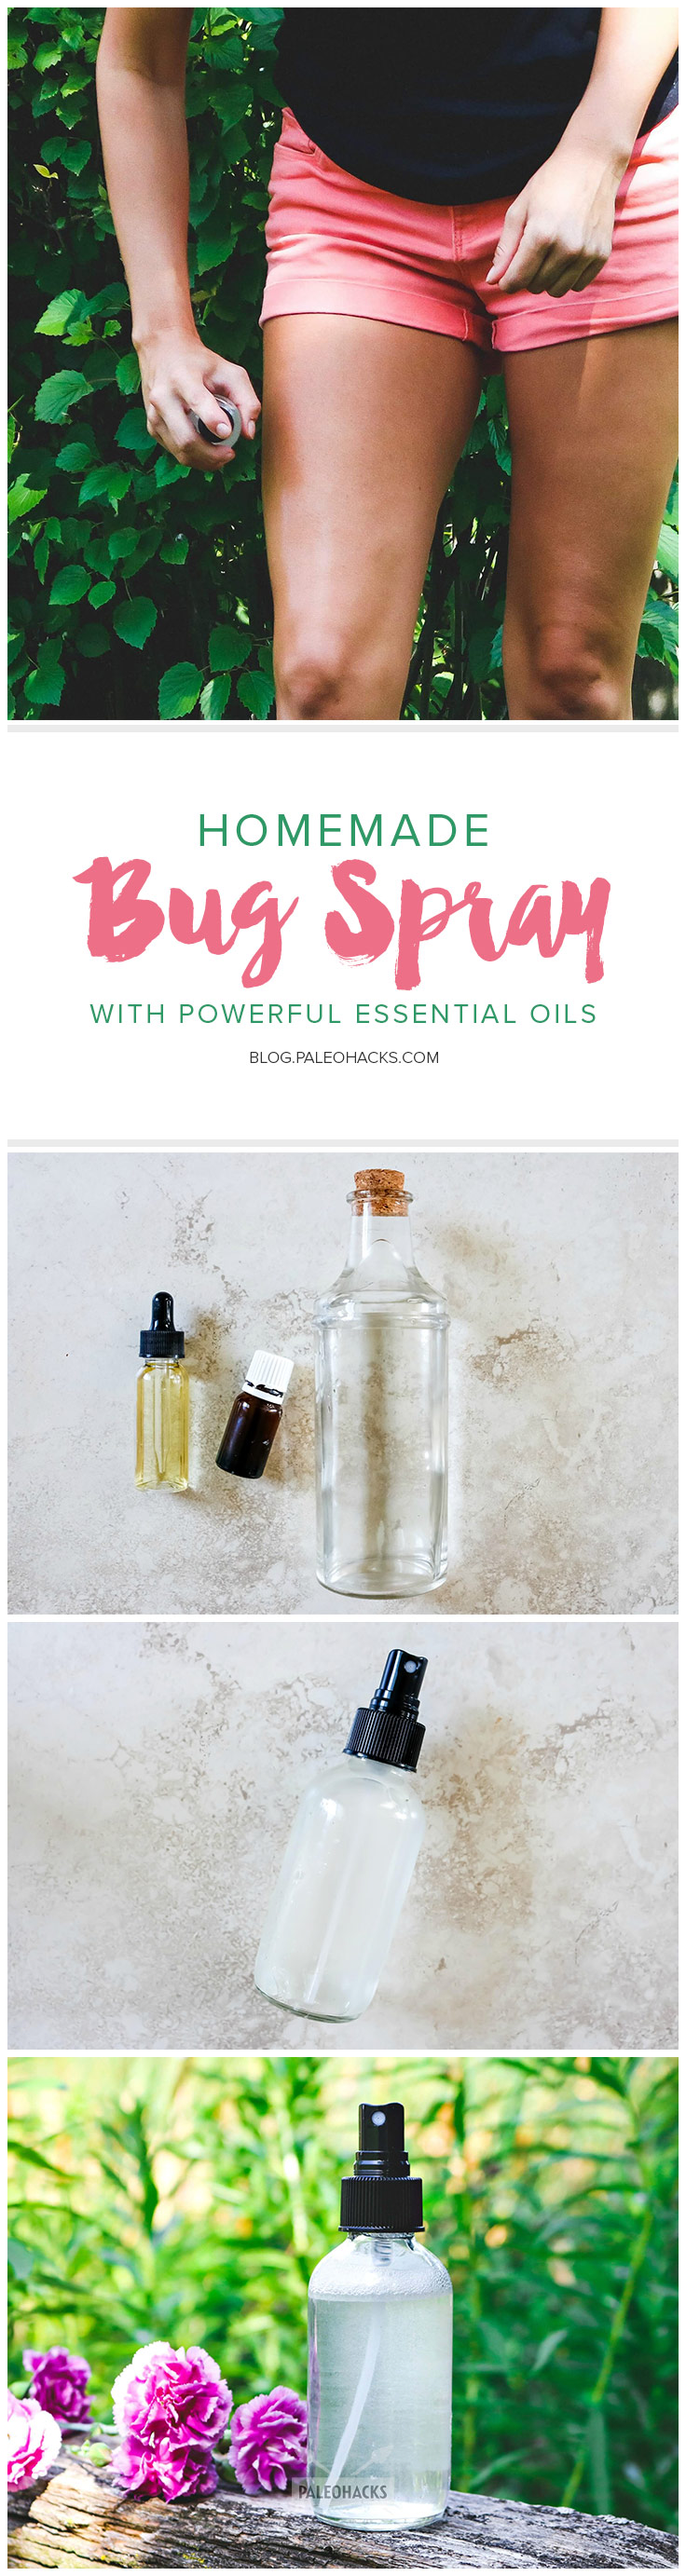 Use this three-ingredient Bug Spray to naturally repel pesky bugs. Spray this natural repellant before going outdoors to naturally protect your skin.